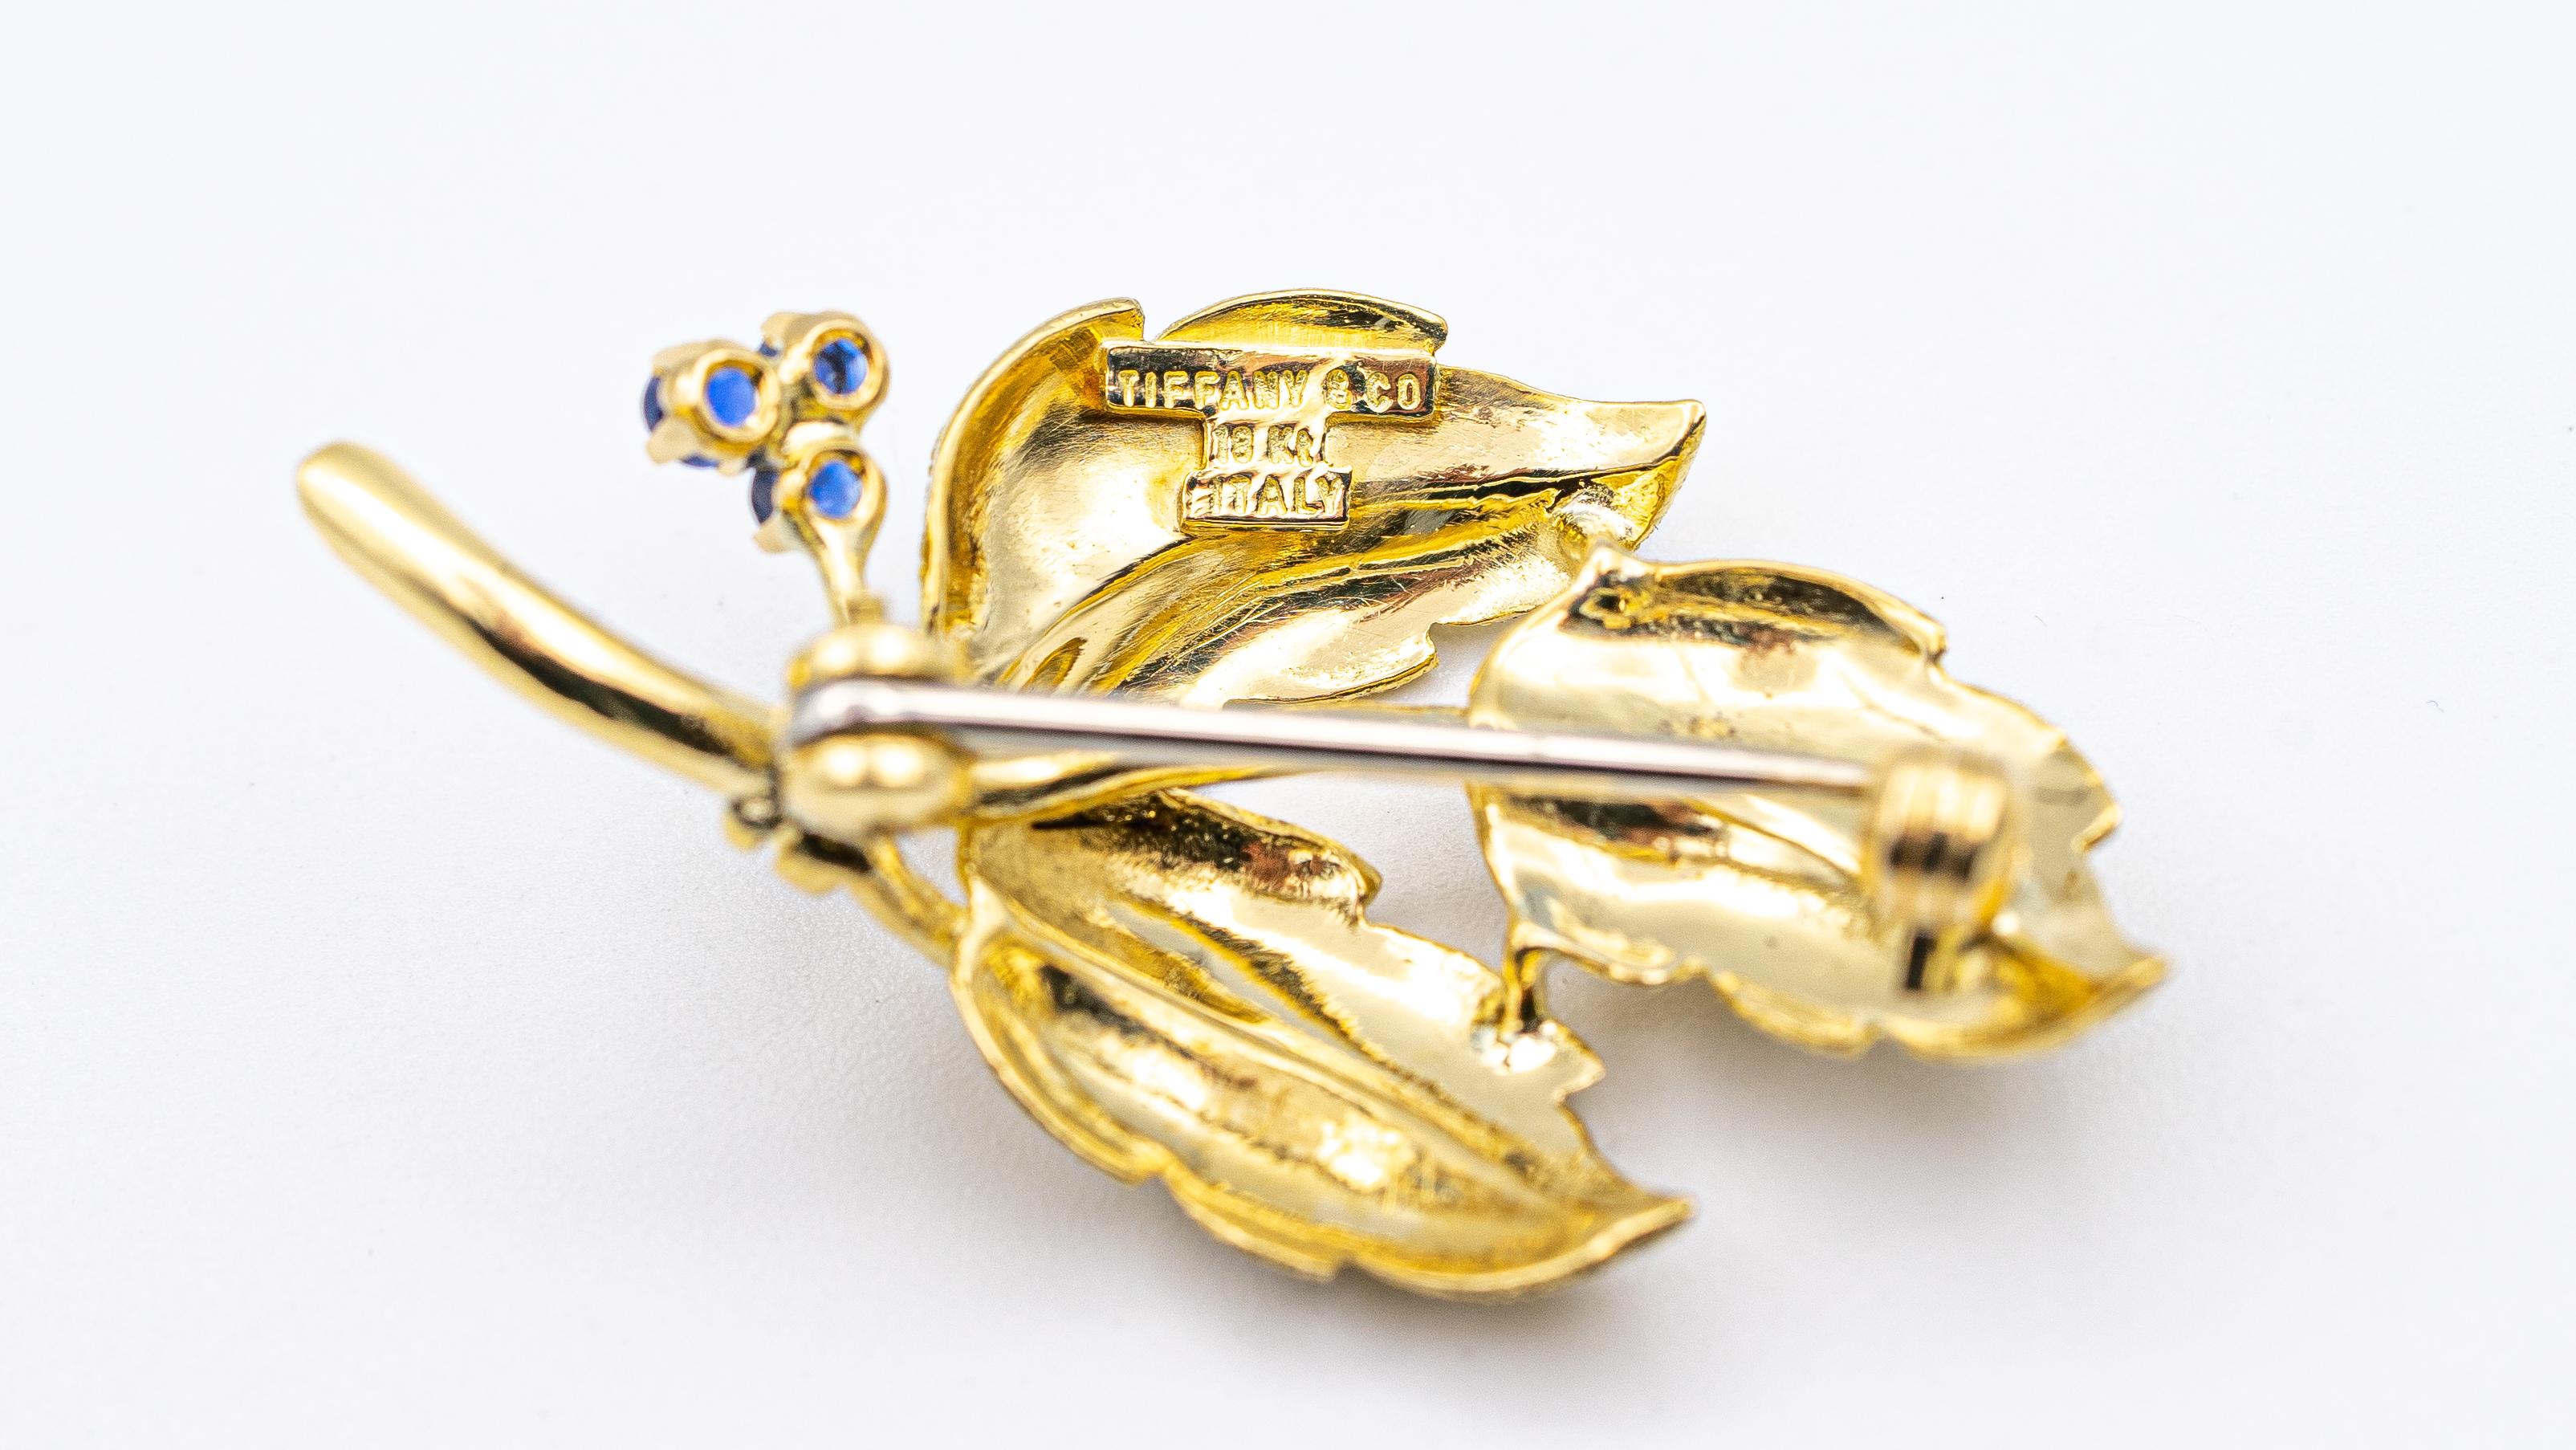 Tiffany & Co. Vintage Sapphire pin finely crafted in Italy, made in 18 Karat yellow gold with 3 round deep blue sapphires. Gold has a Florentine satin finish with detailed patterns on the leaves.

Hallmarks: Tiffany & Co. Italy 18K
Measurements: